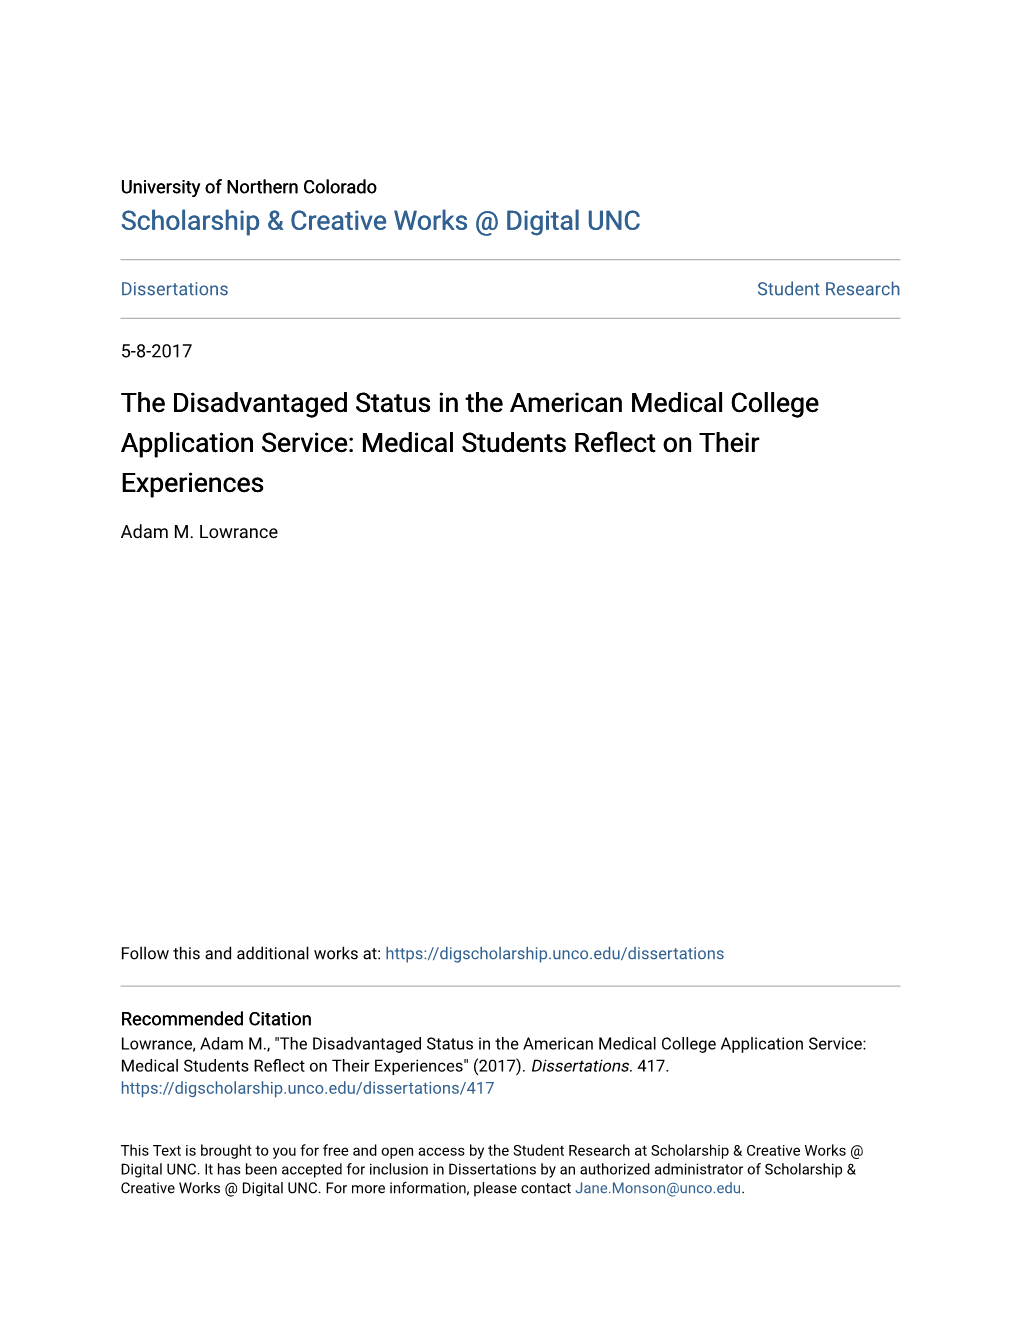 The Disadvantaged Status in the American Medical College Application Service: Medical Students Reflect on Their Experiences